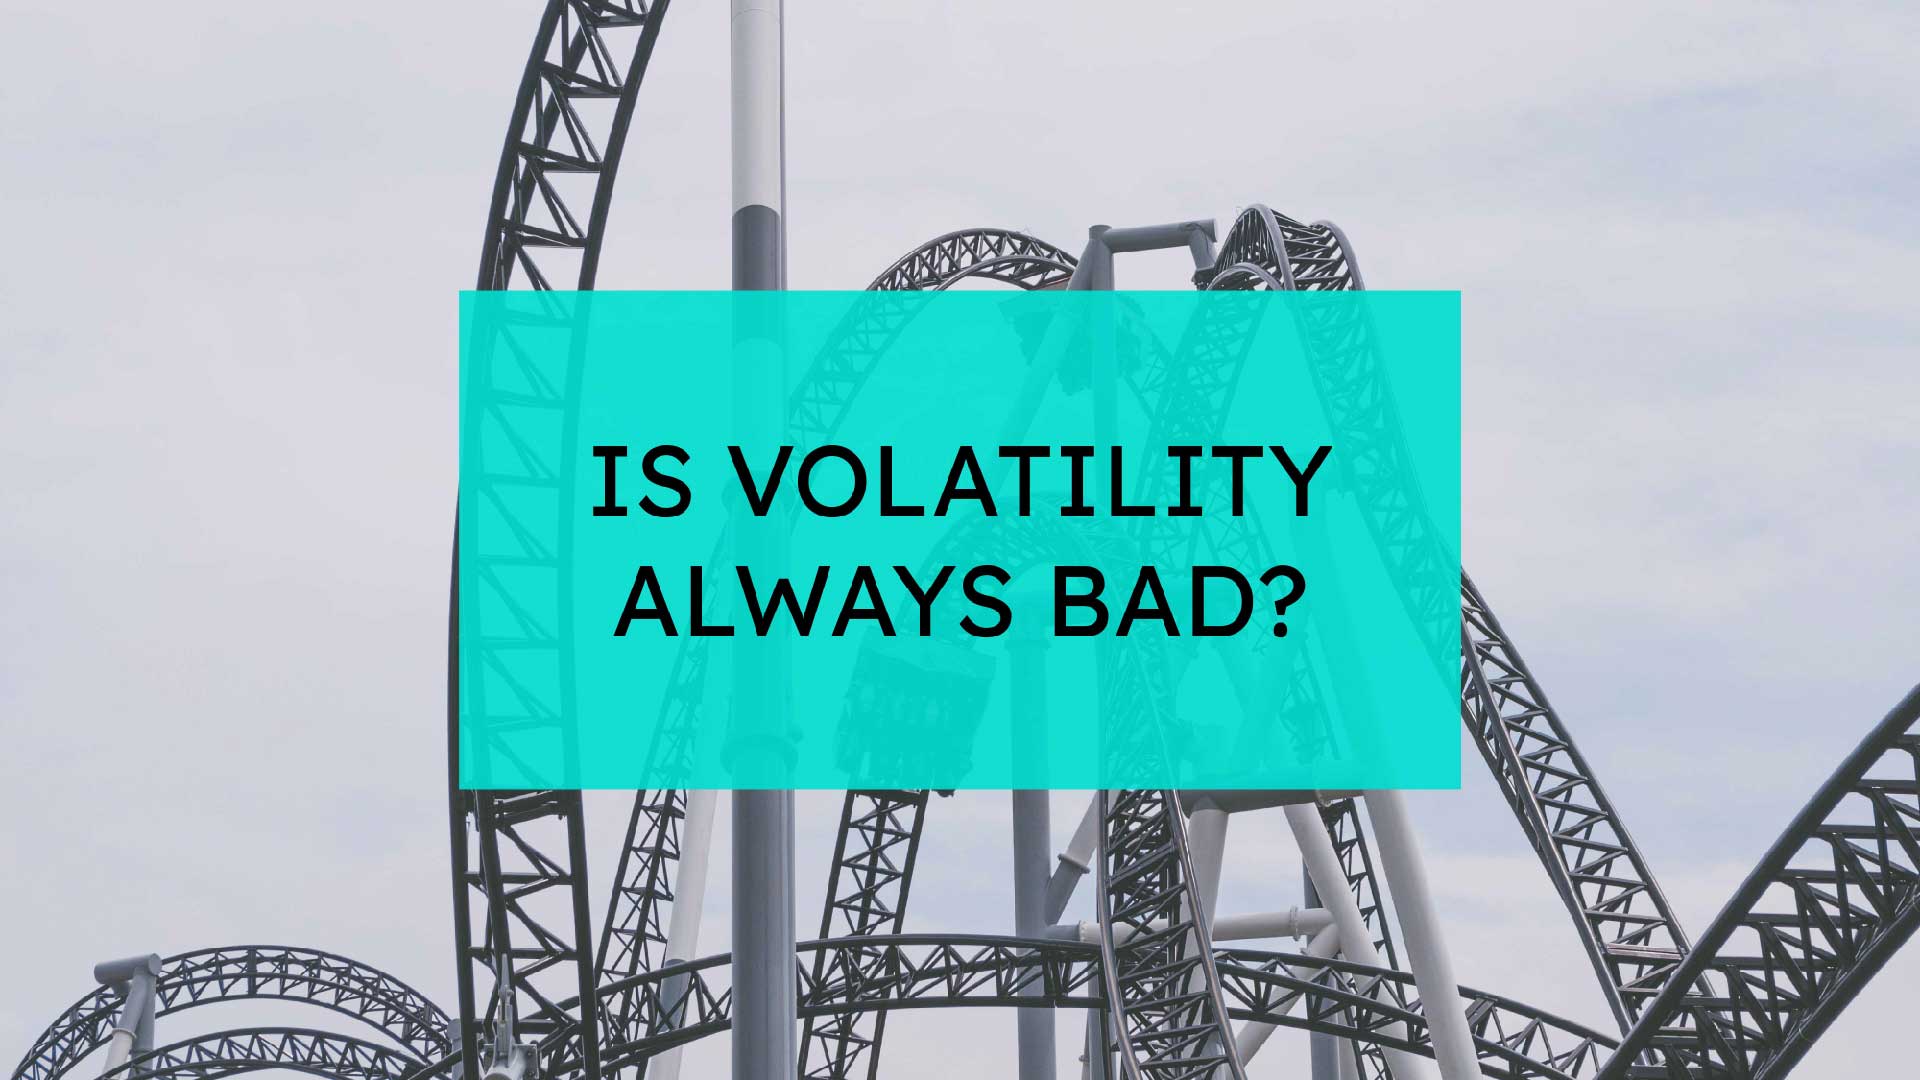 What Can Historical Volatility Teach Us?